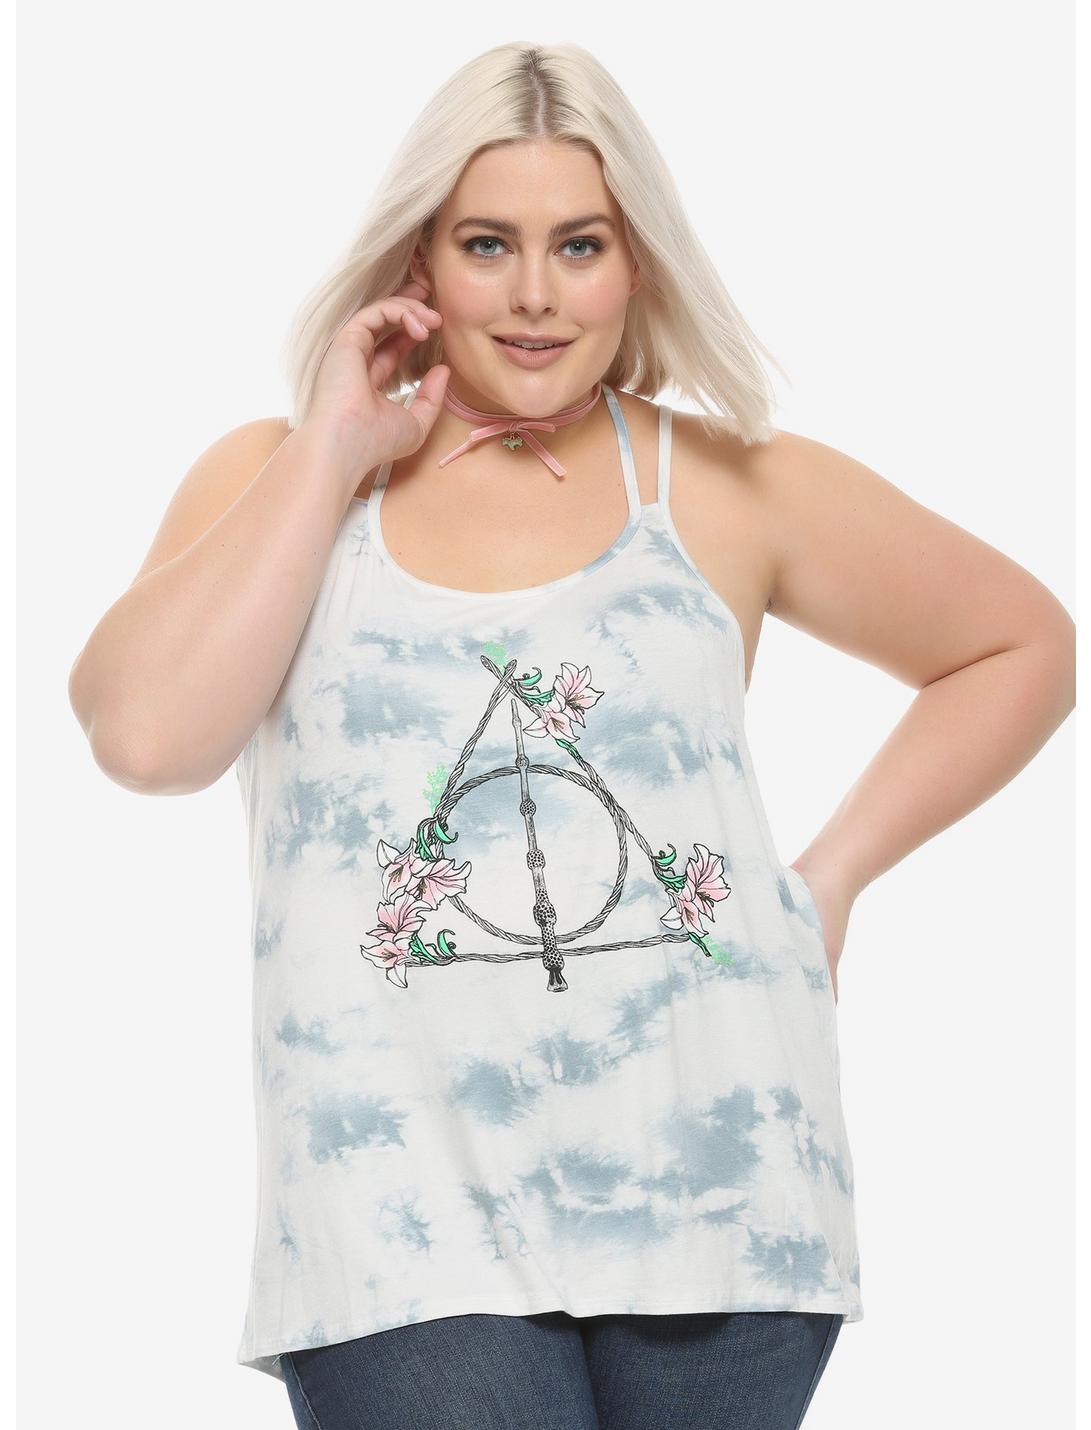 Harry Potter Deathly Hallows Lily Girls Strappy Tank Top Plus Size, WHITE, hi-res